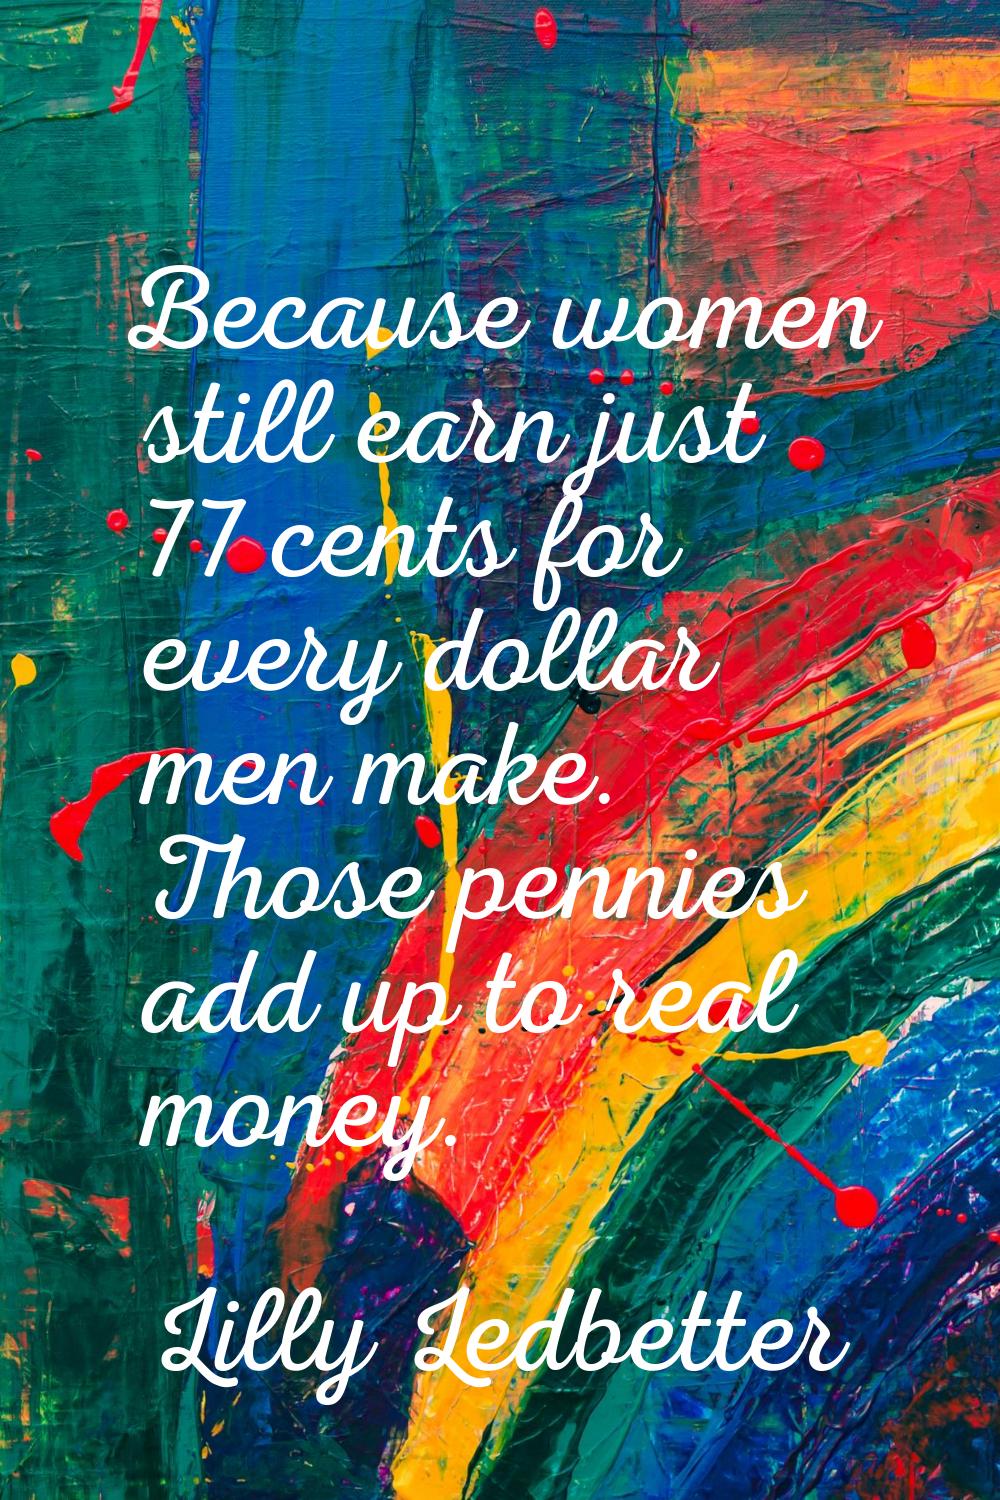 Because women still earn just 77 cents for every dollar men make. Those pennies add up to real mone